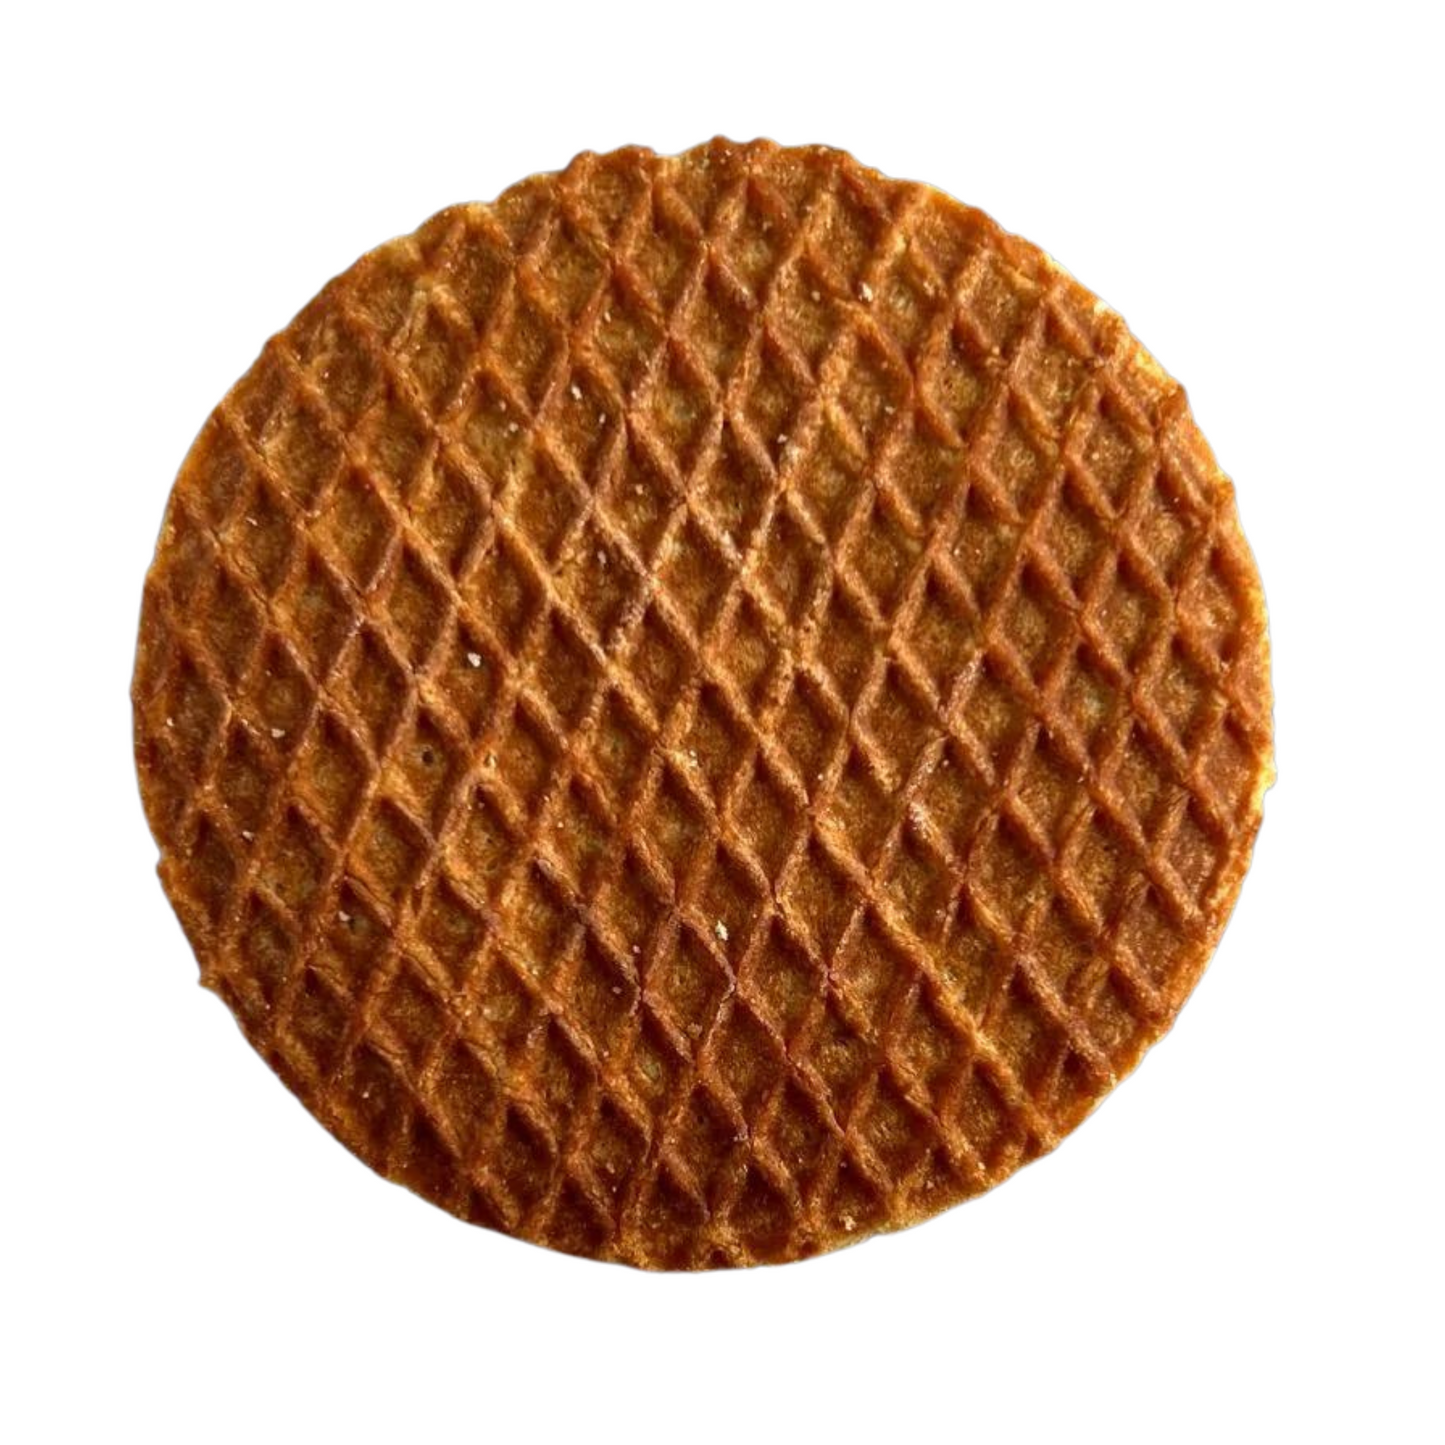 Classic 32 Stroopwafels (4 x 8 Count Wrapped)